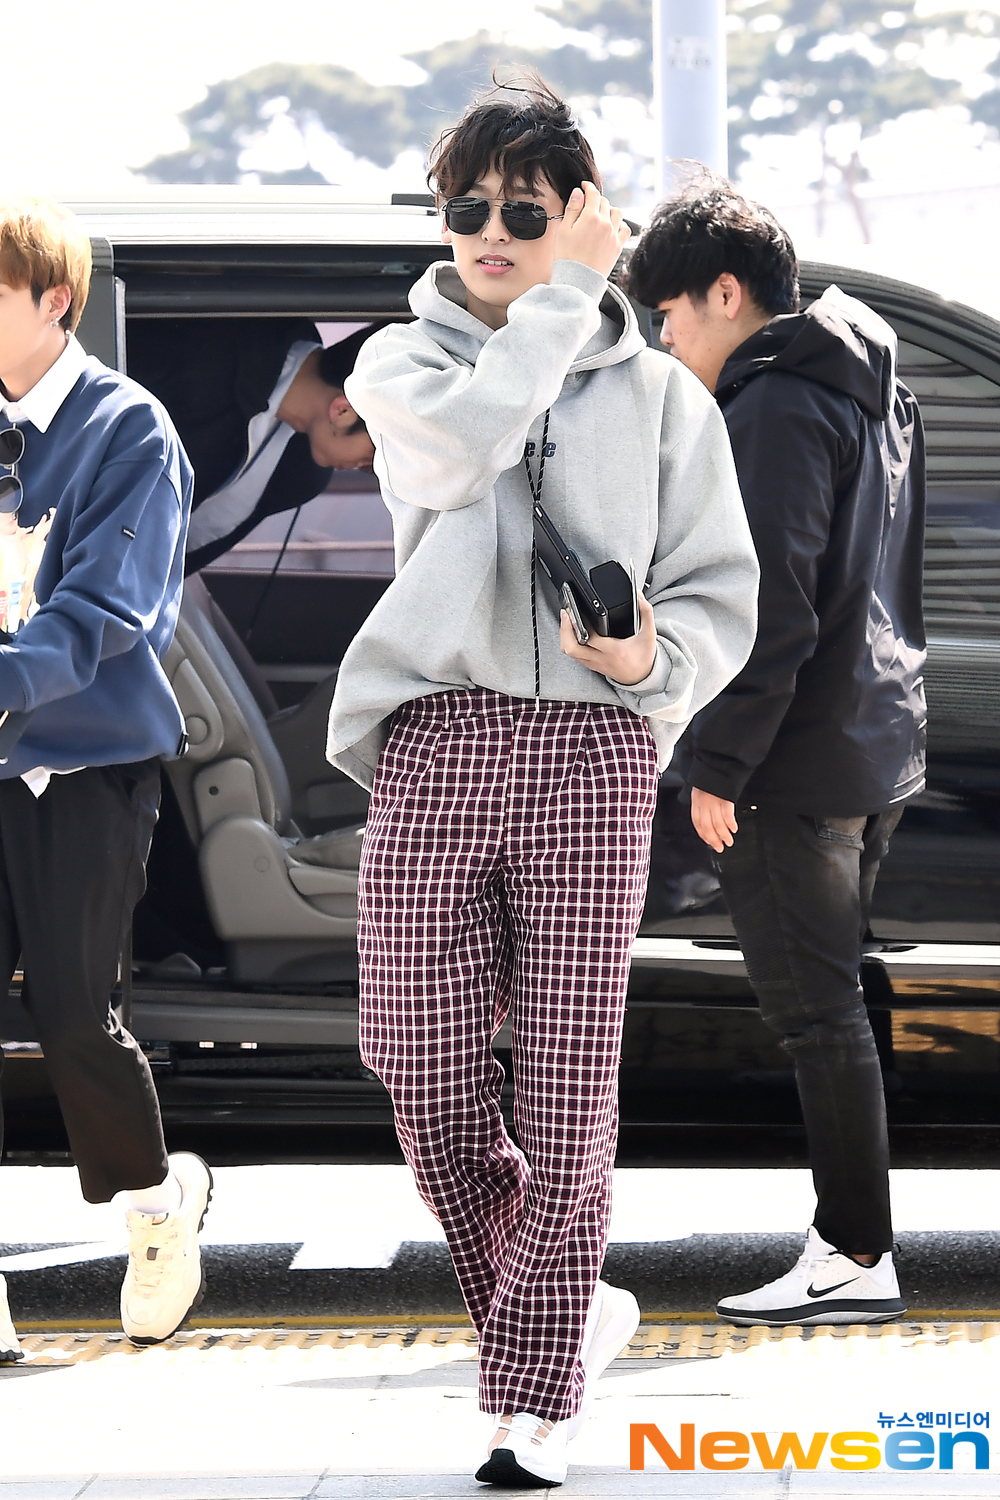 Seven Oclock members Han Kyeom, Hyun, Isol, Jung-gu, Taeyoung and Andy left for Germany on April 4th through Incheon International Airport in Unseo-dong, Jung-gu, Incheon.Seven OClock member regulars are leaving for Germany with an airport fashion.exponential earthquake